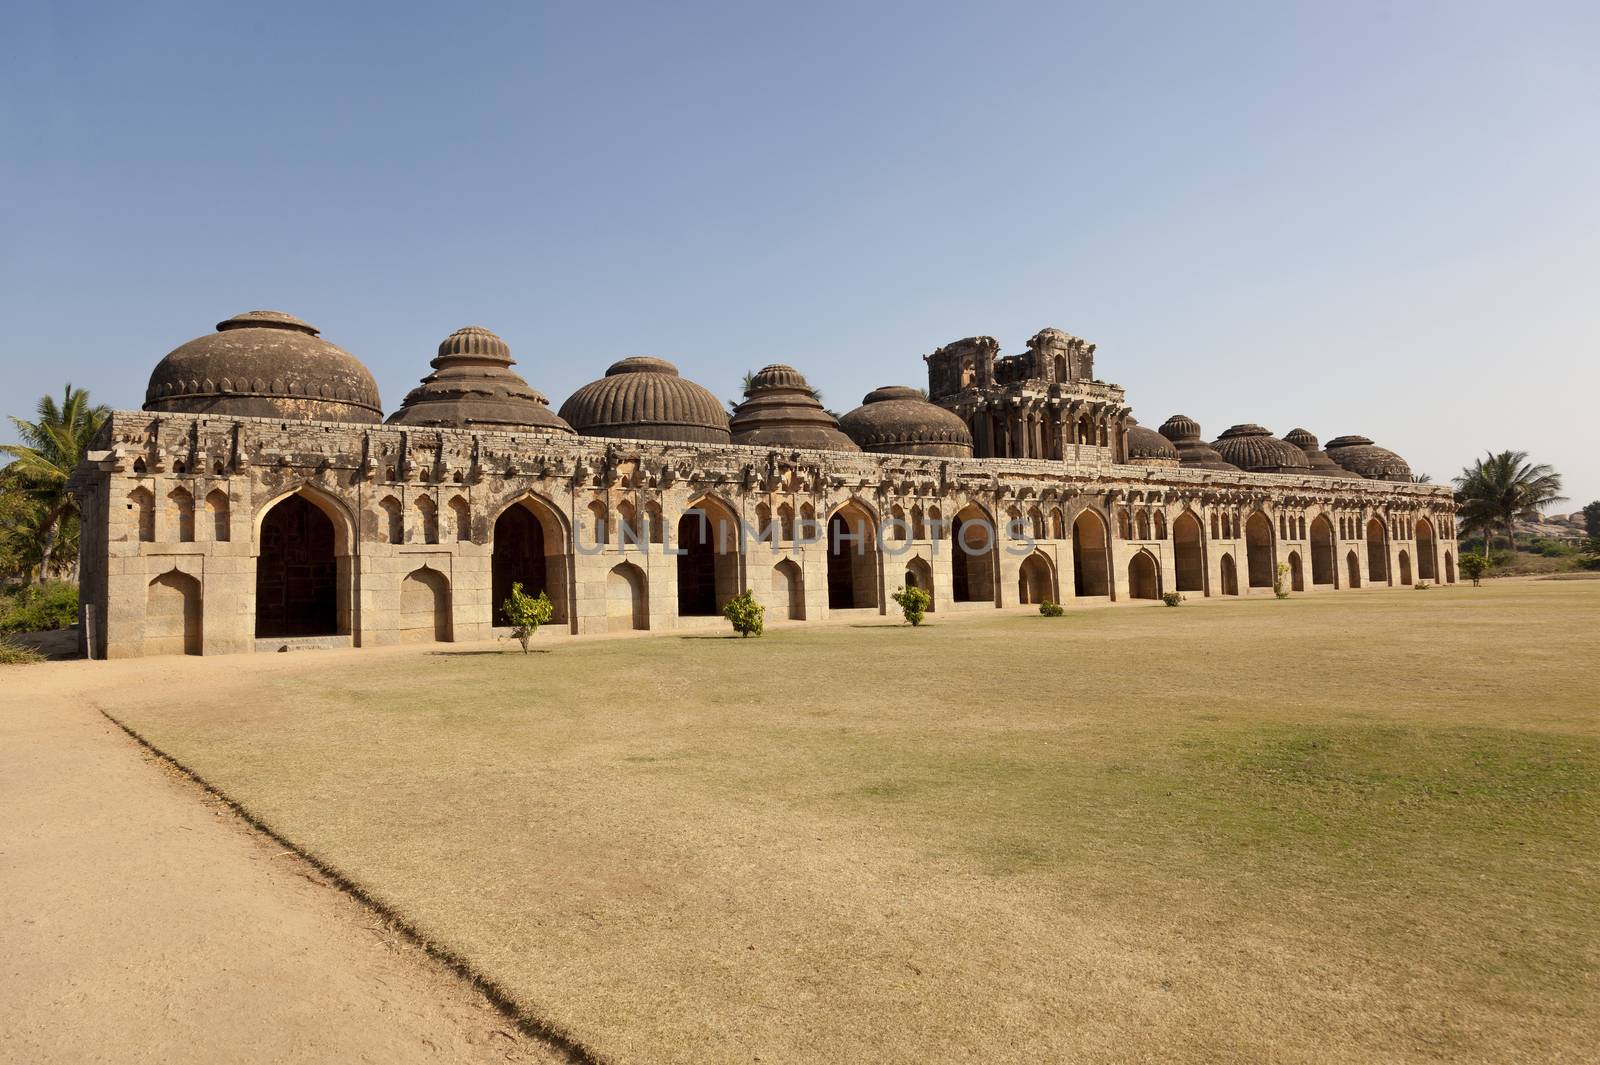 Elephant stables at Royal enclosure - Vijayanagara complex - one of the highlight of the Hampi temple complex in India